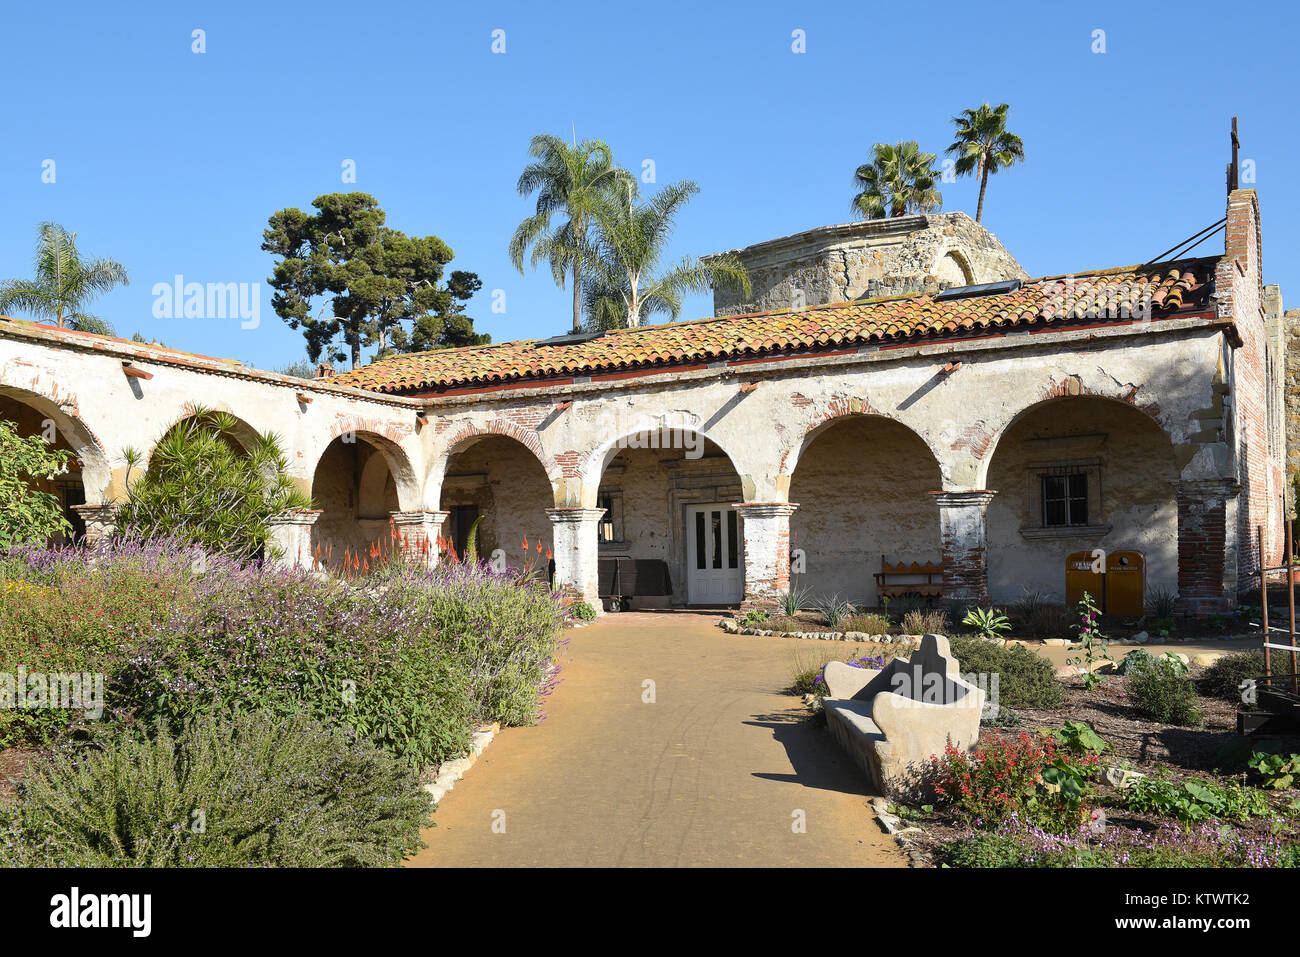 San Juan Capistrano, Ca - December 1, 2017: Grounds at the historic mission founded in 1776, by Father Junipero Serra. Stock Photo